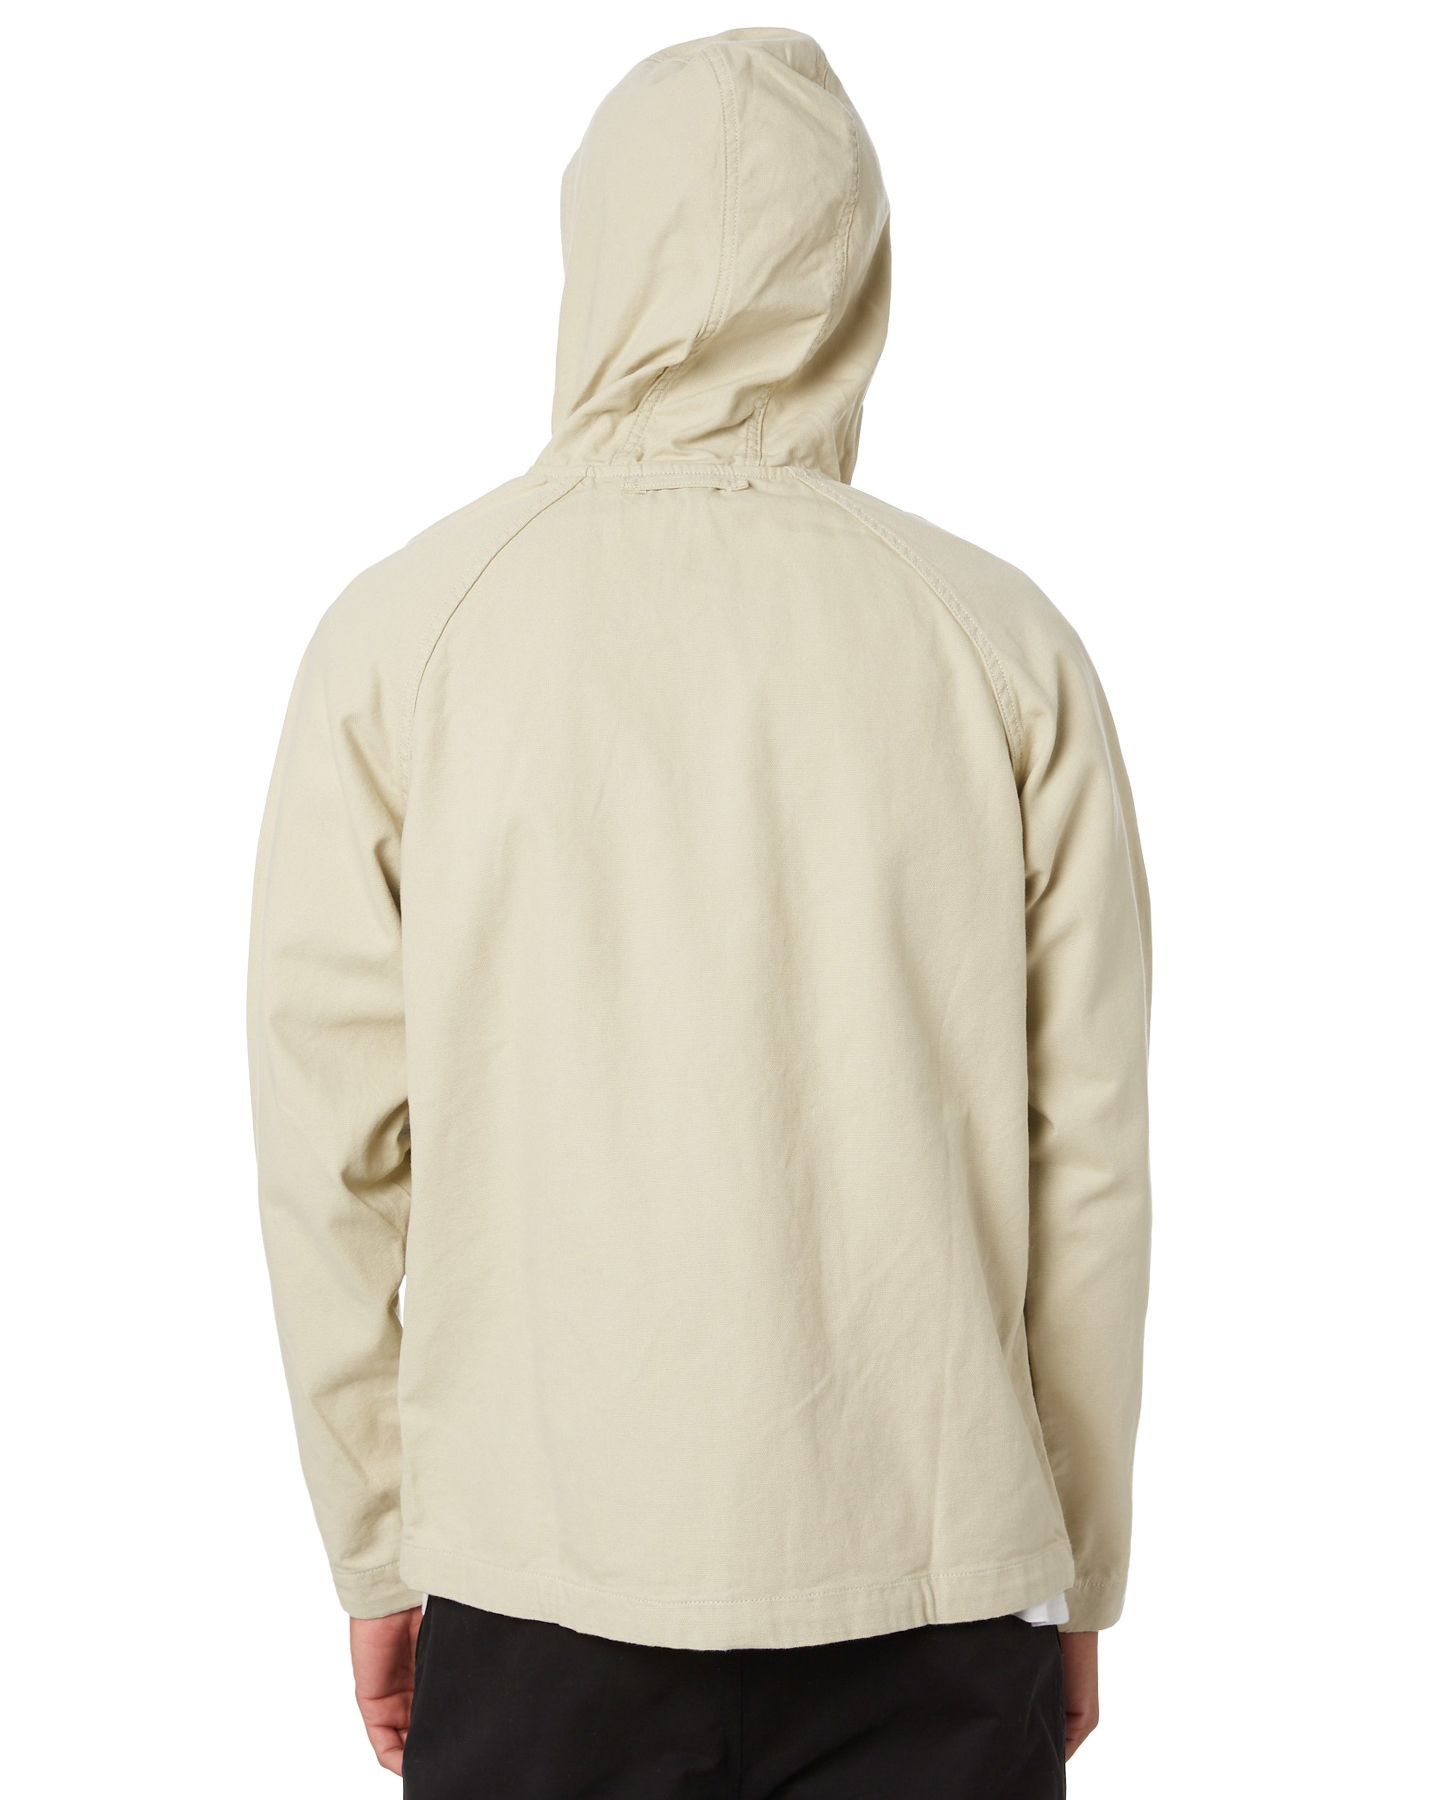 Patagonia Organic Cotton Canvas Mens Jacket - Pelican | SurfStitch